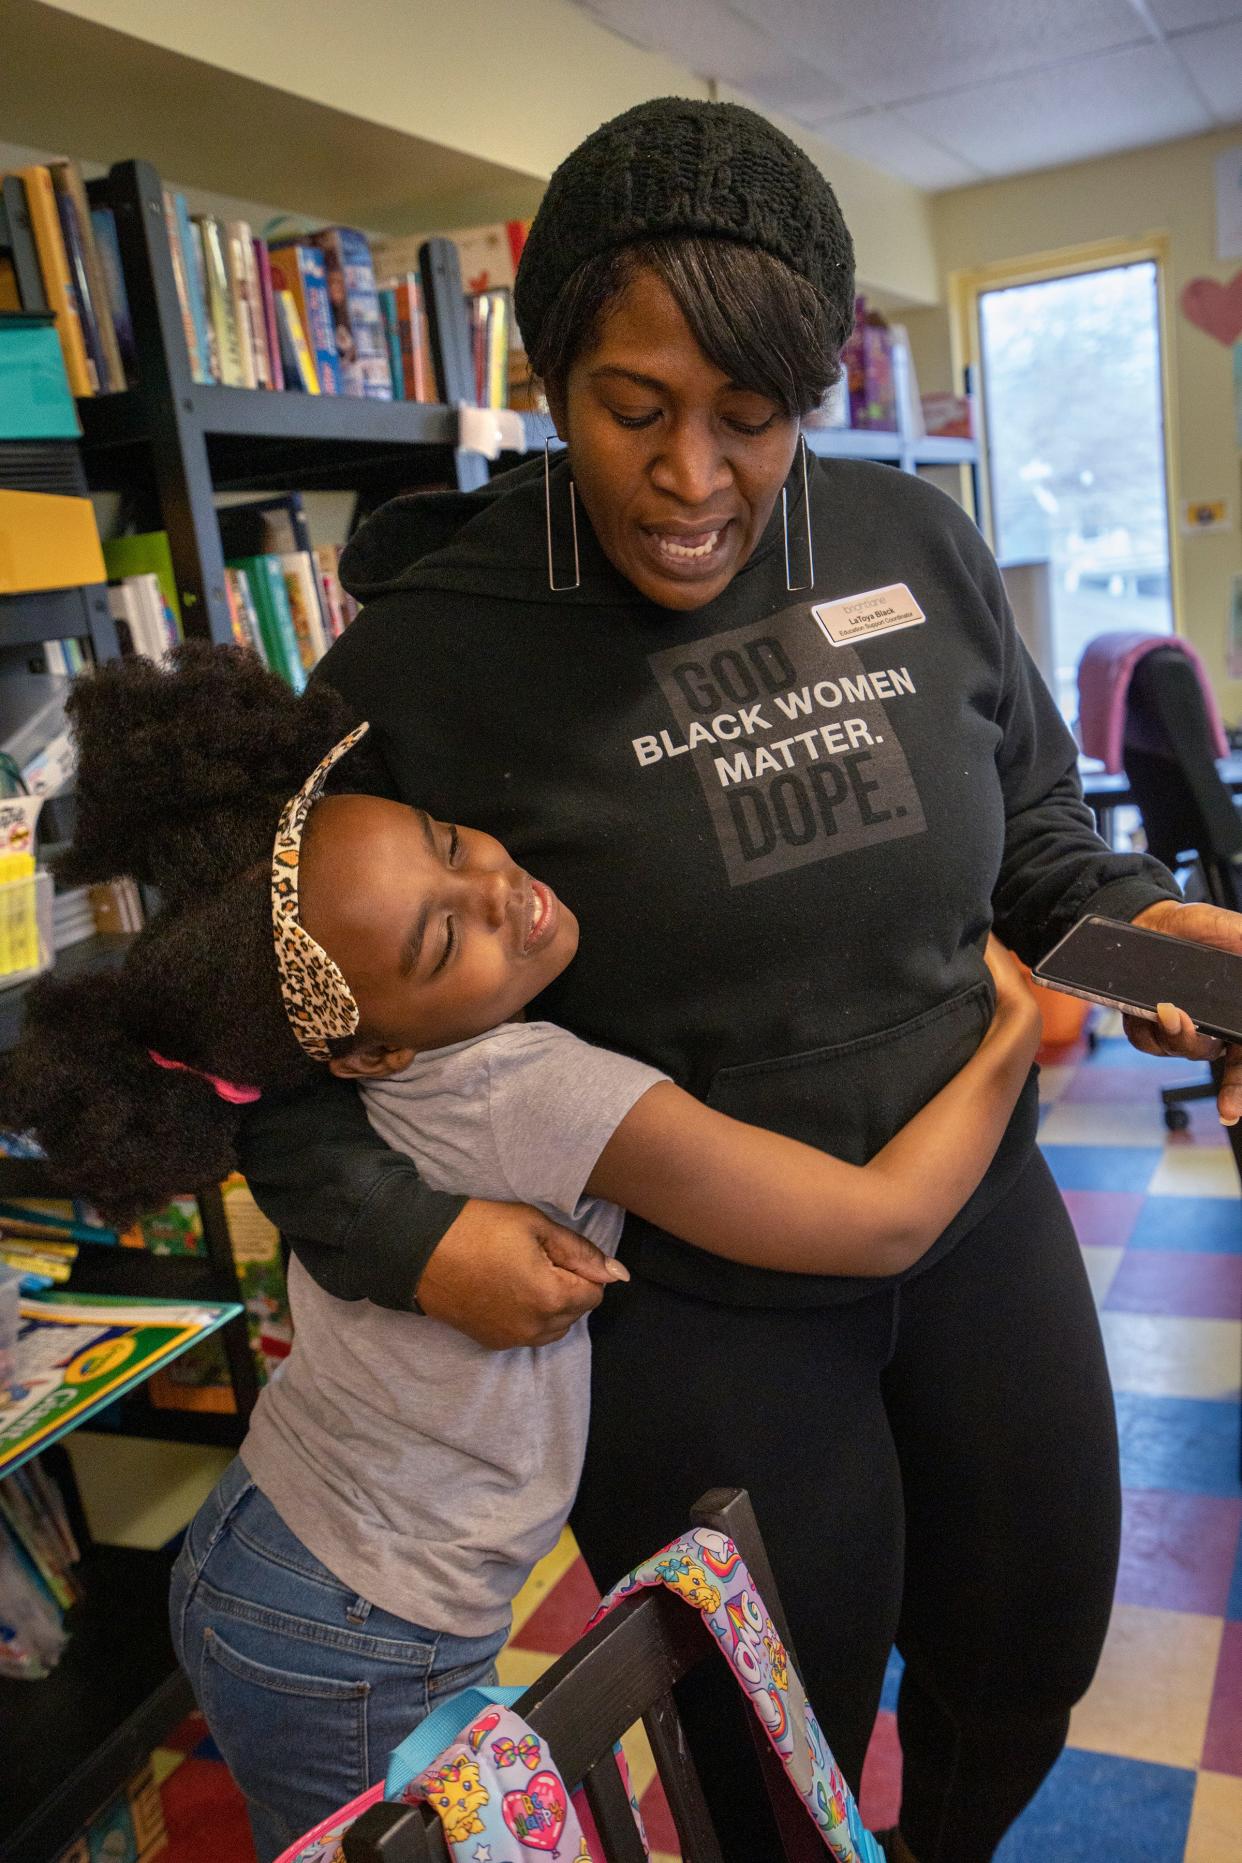 Rosetta Walker, left, gets a big hug from Brightlane Education Support Coordinator LaToya Black who presents her with headphones Tuesday, Feb. 7, 2023 at Dayspring Center. Brightlane volunteers tutor the kids in the shelter. Rosetta lives there with her mother, Doris Jones, and her sister, Samantha Hillard.